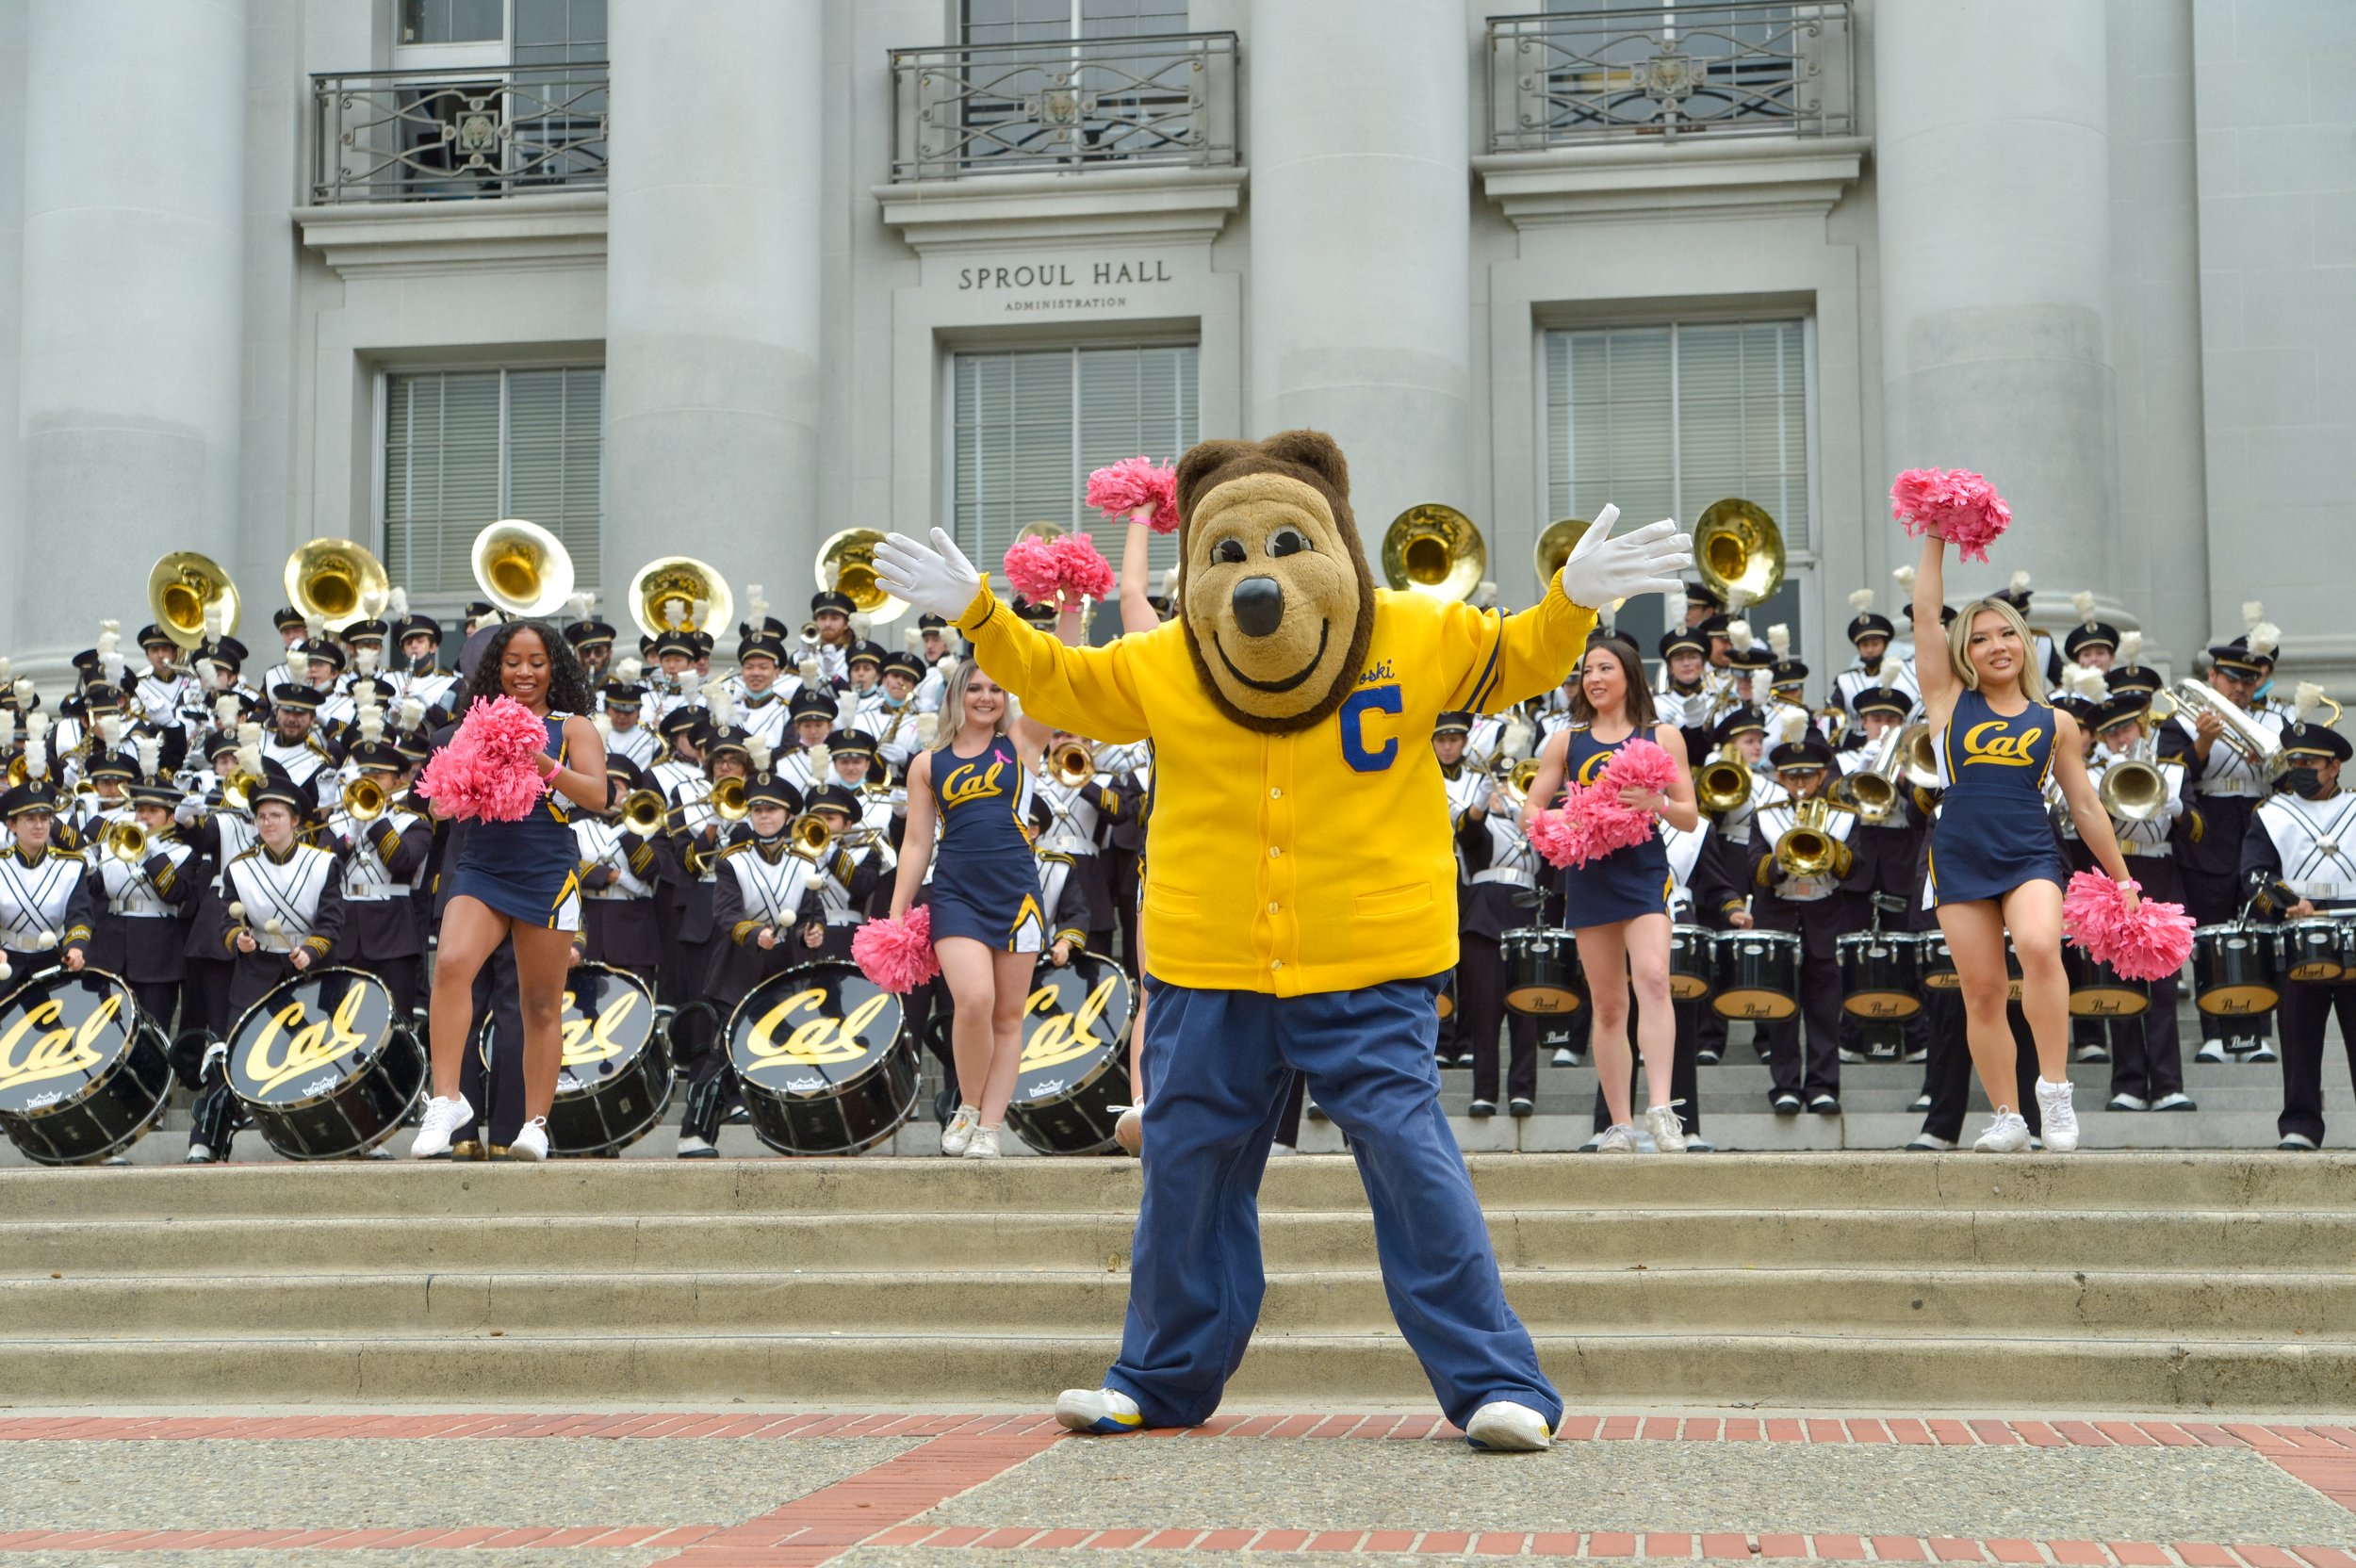 Oski During a Pregame Rally. Credit Andrew Madsen